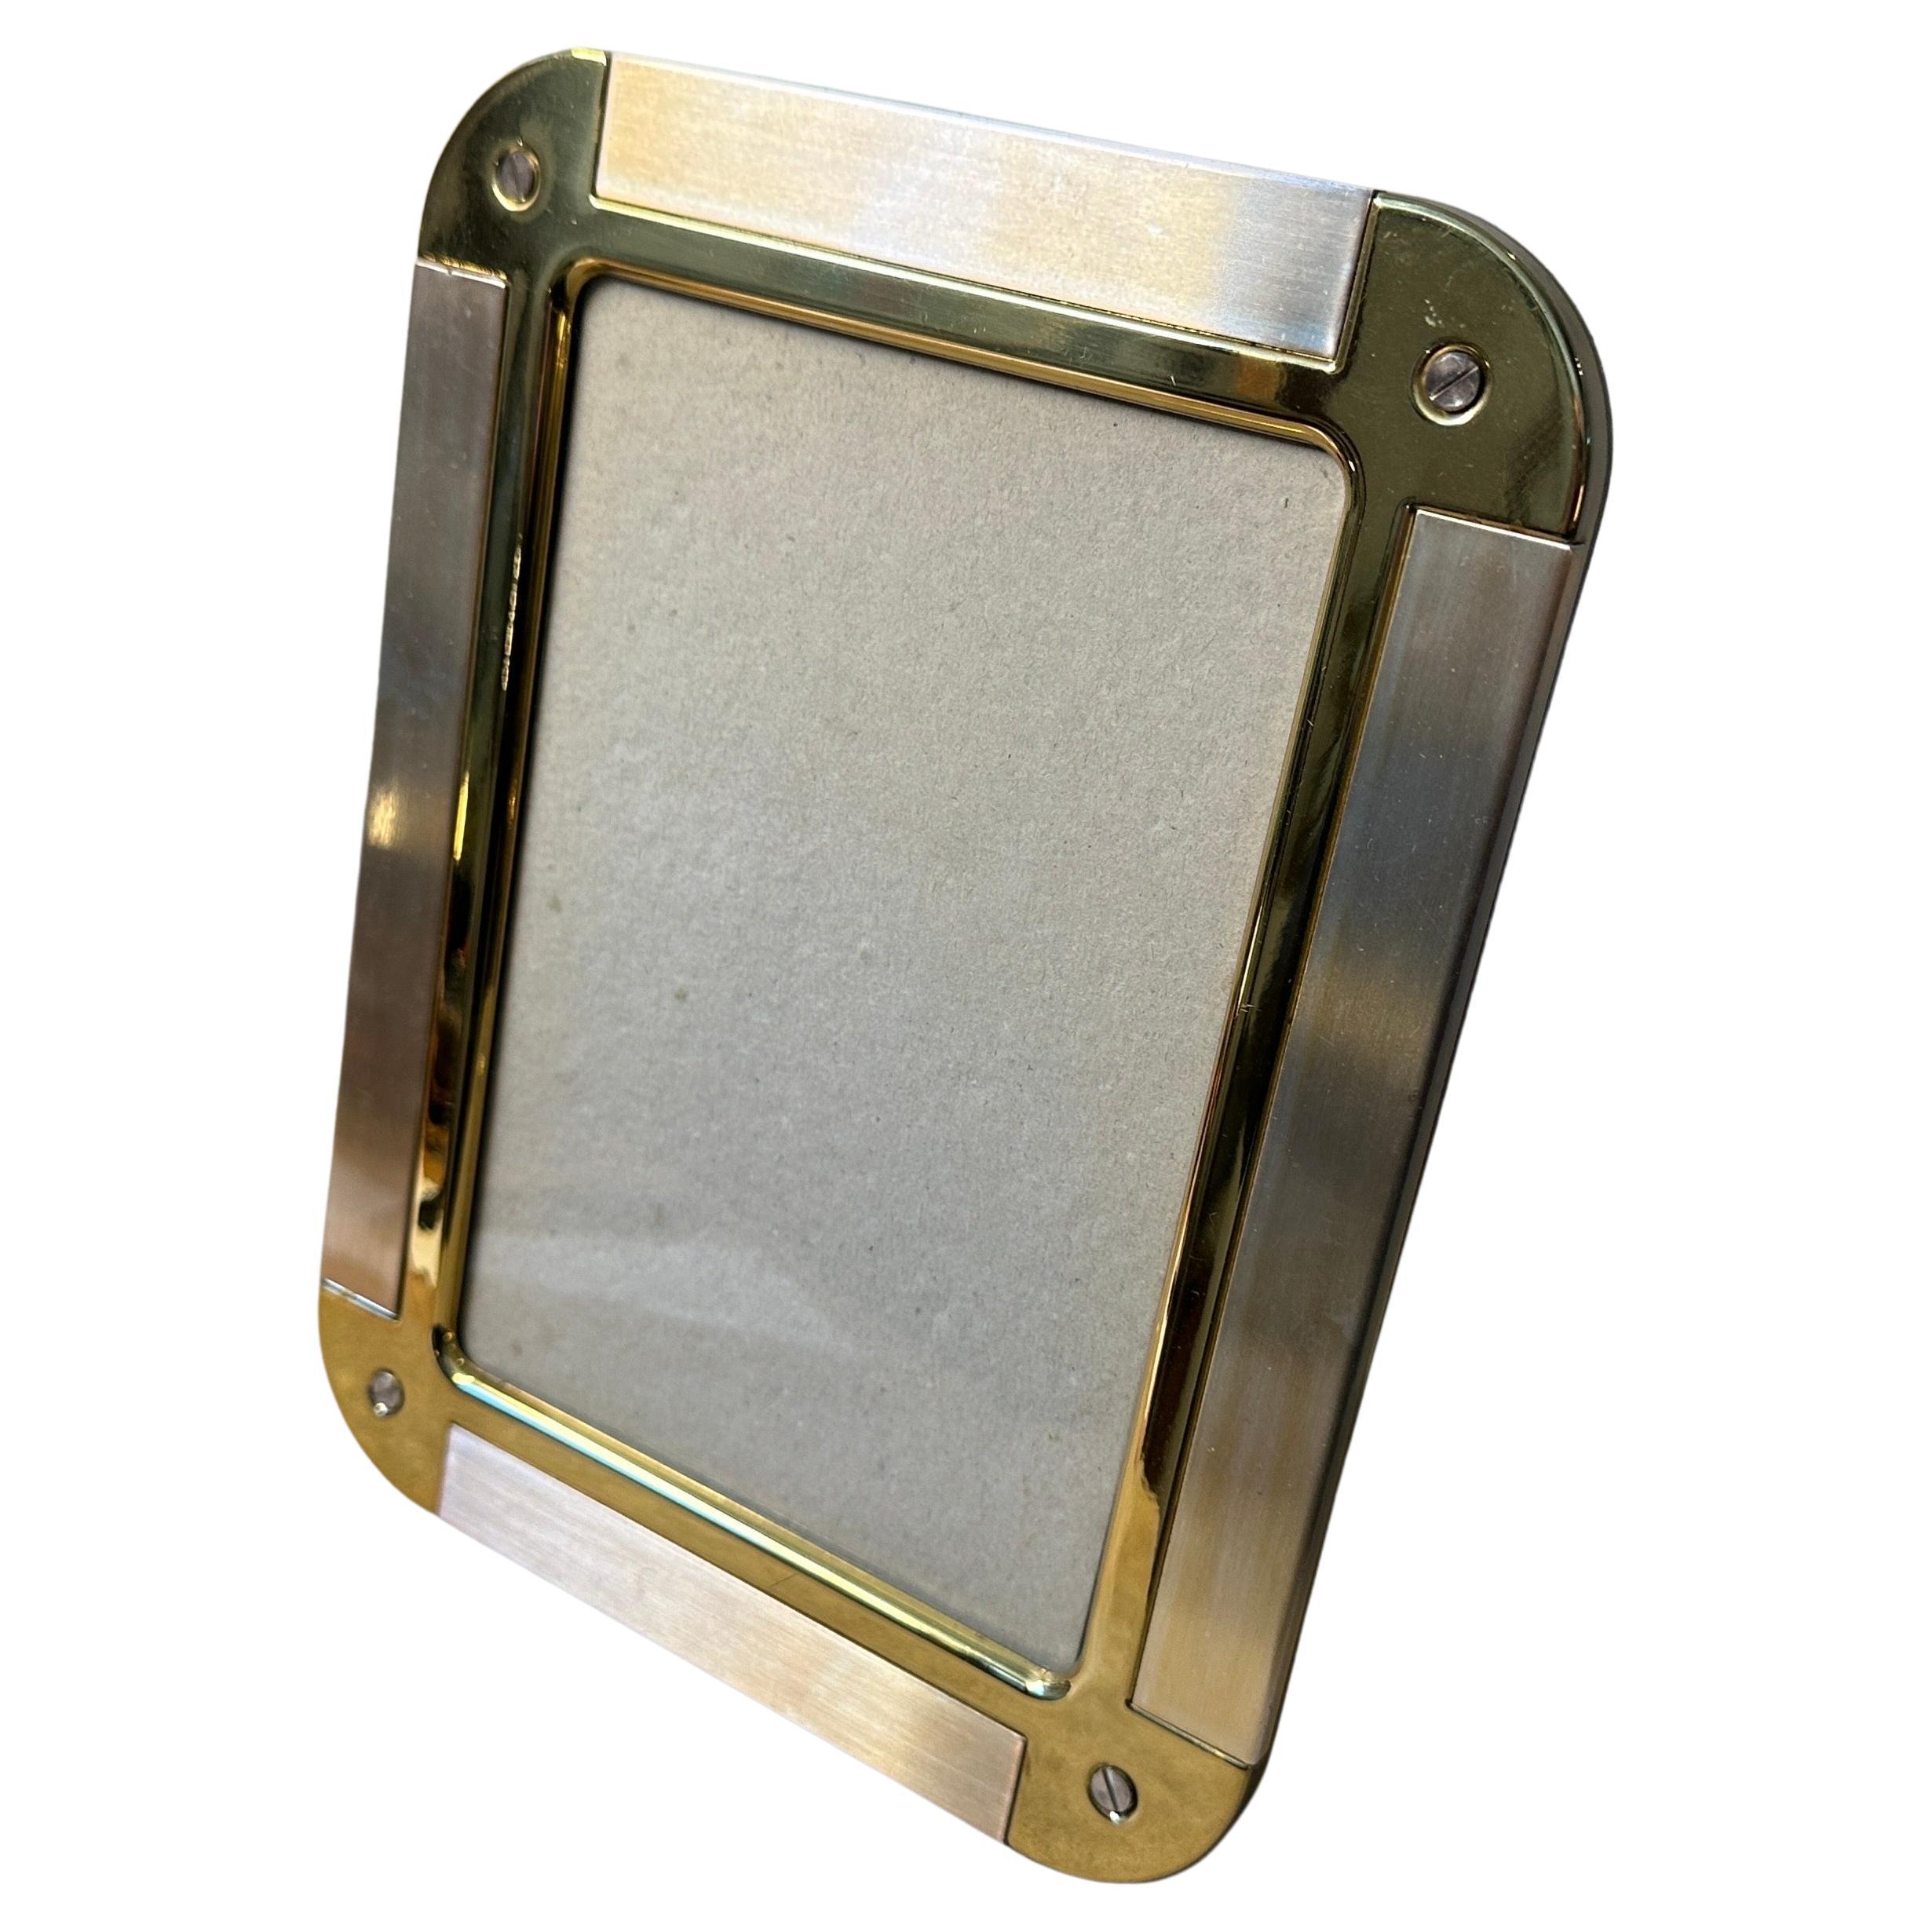 This picture frameis an exquisite piece of home decor, reflecting the luxury, sophistication, and innovative design that Gucci and similar high-end Italian brands are known for. Crafted from metal, the frame features a combination of silvered and